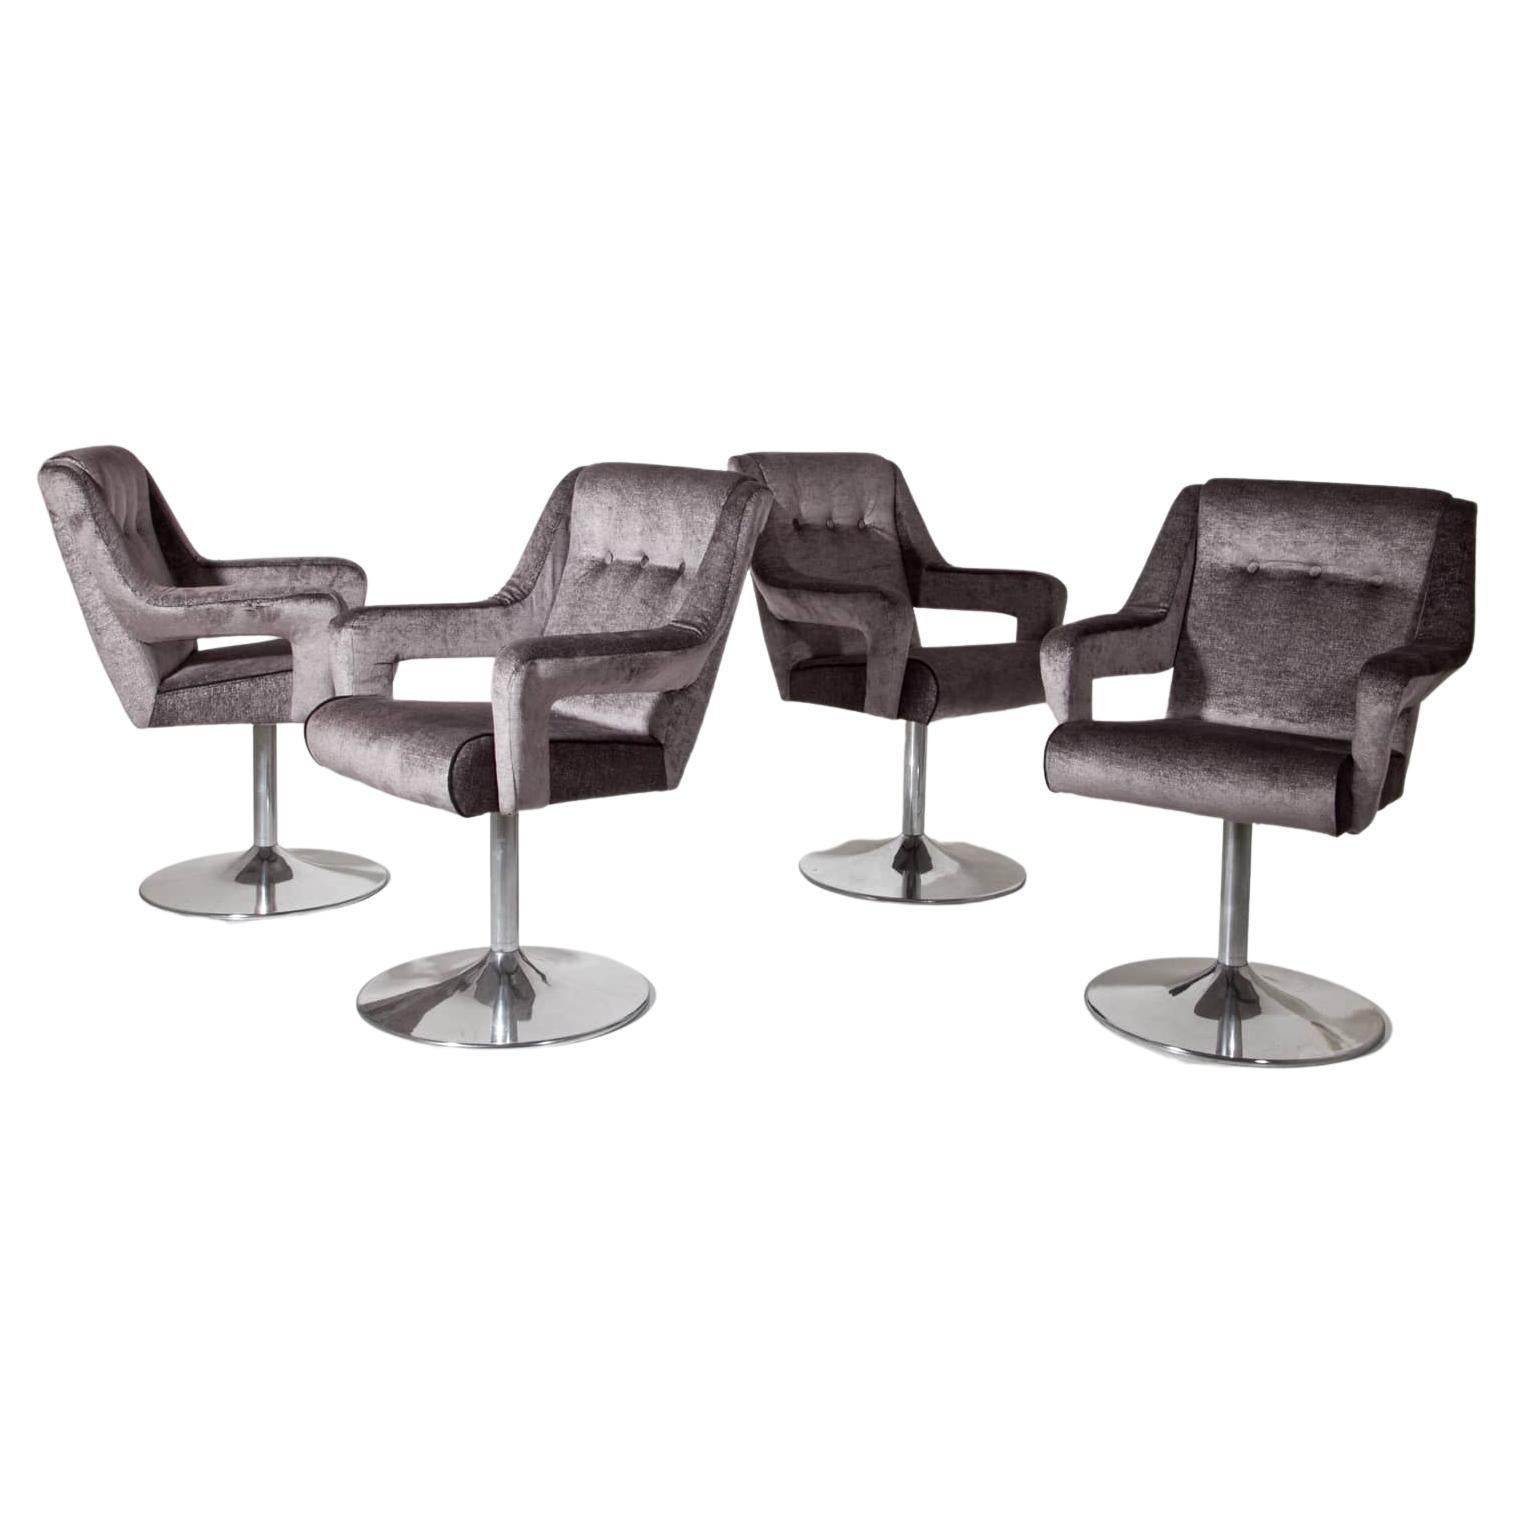 Set of Four Metal Swivel Chairs, Italy, Mid-20th Century